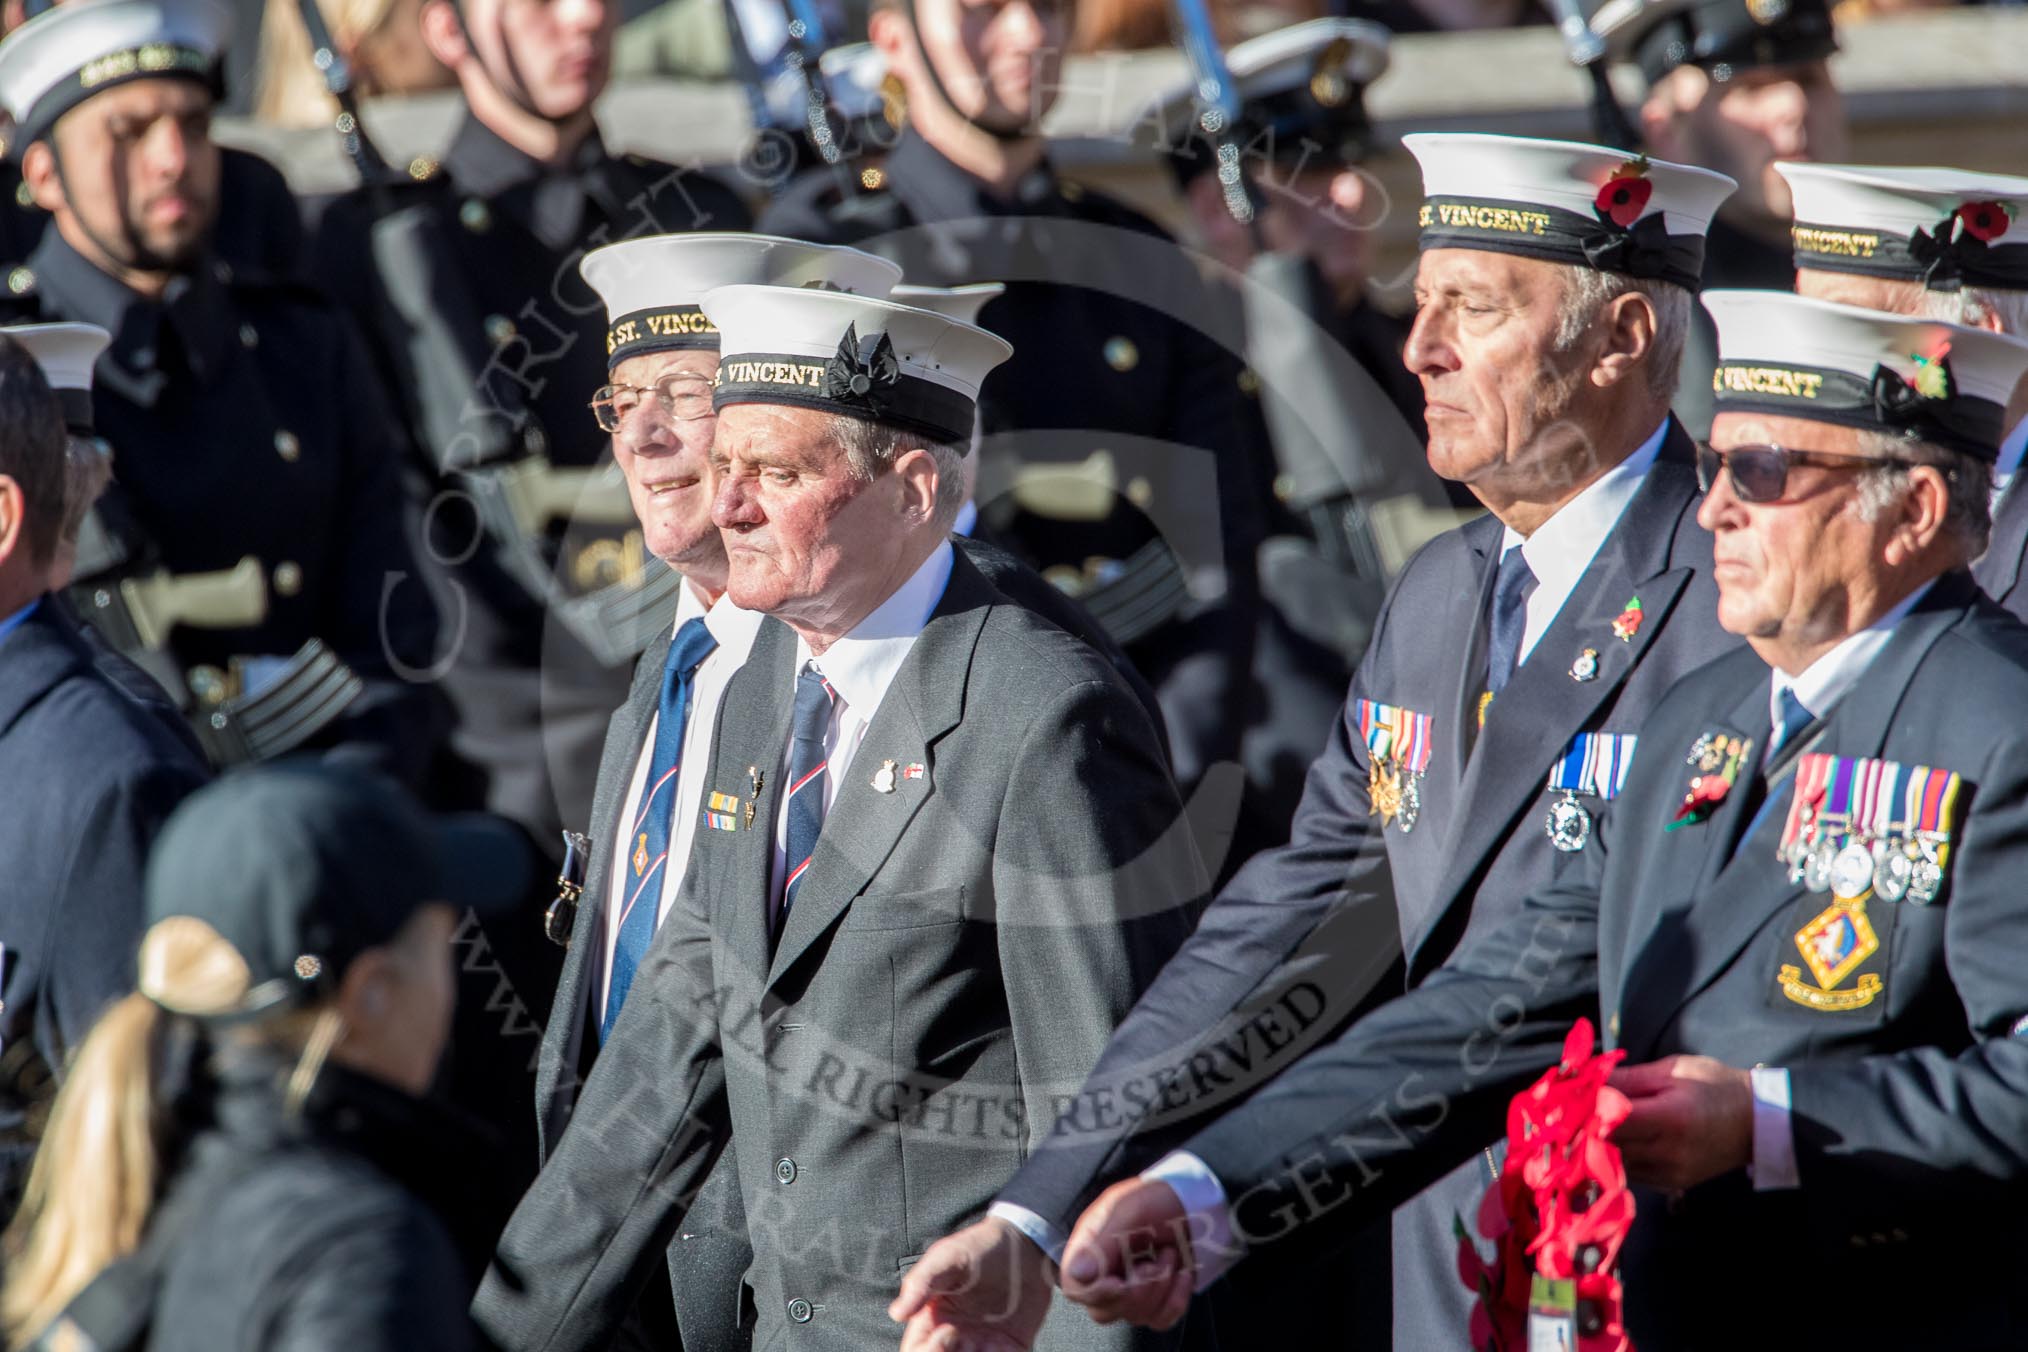 HMS St. Vincent Association  (Group E24, 14 members) during the Royal British Legion March Past on Remembrance Sunday at the Cenotaph, Whitehall, Westminster, London, 11 November 2018, 11:44.